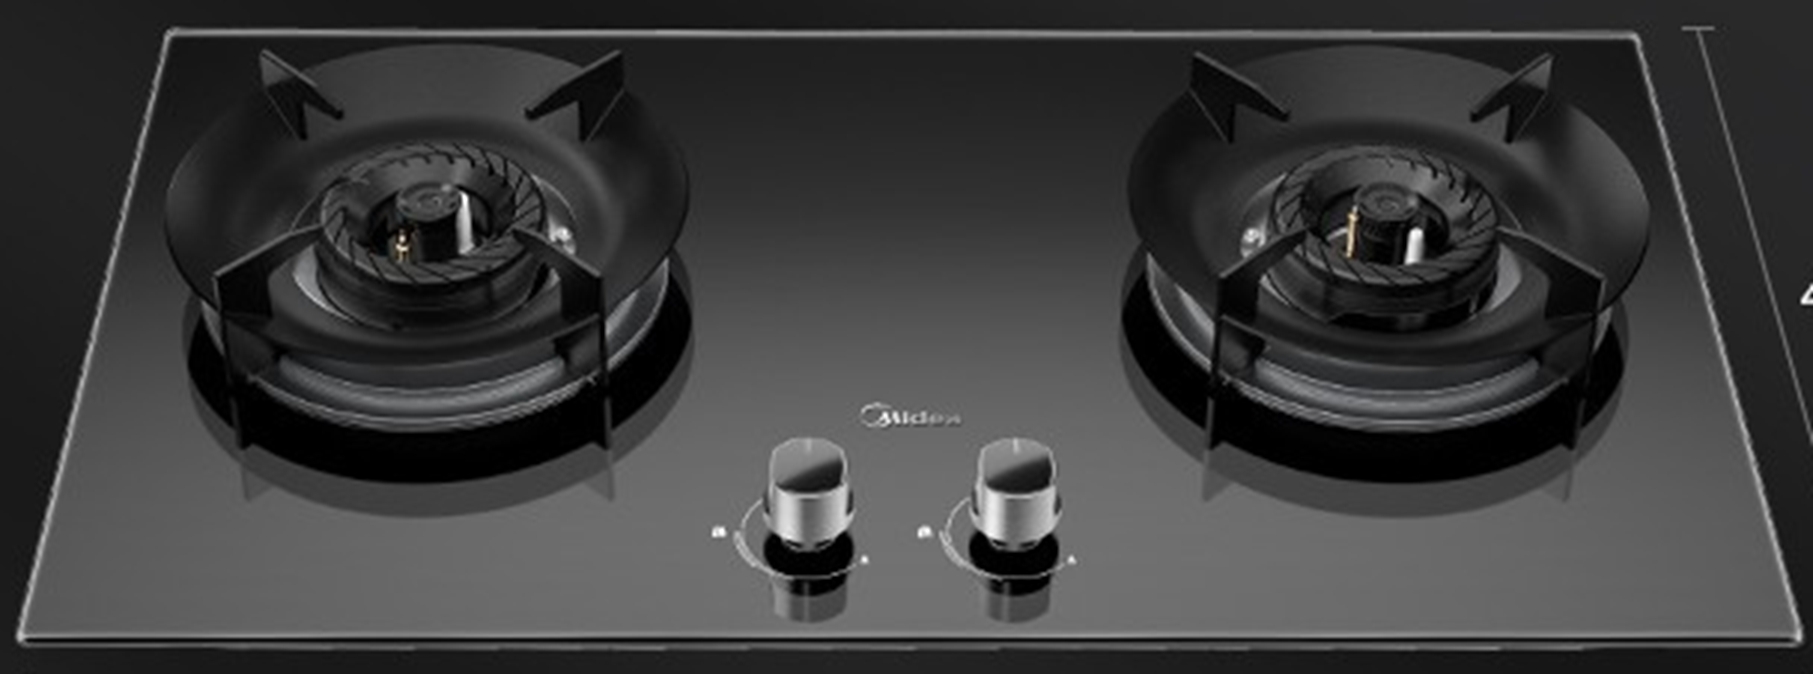 Description: Built-in Gas Hob with 5.8kW Burners - MGH-2280GL